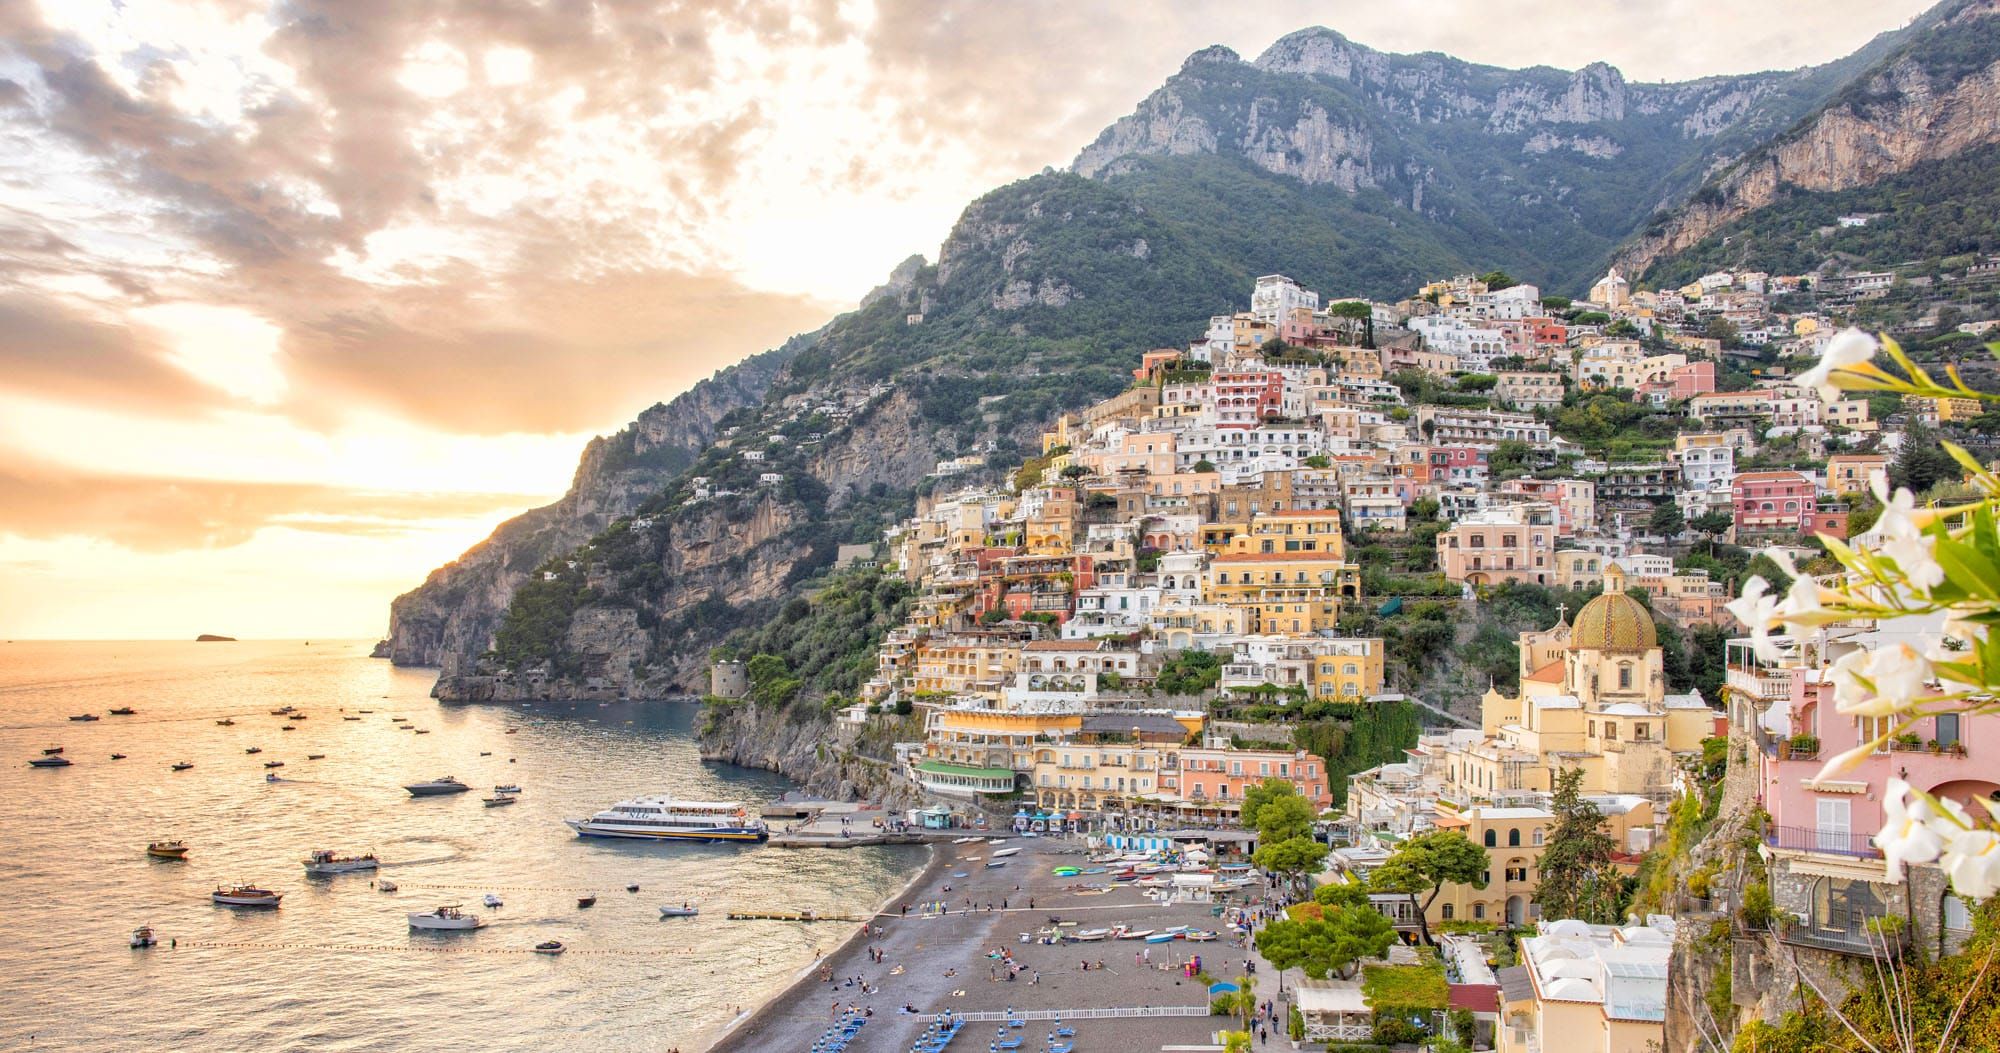 Featured image for “Amalfi Coast Itinerary: 5 Ways to Plan Your Trip”